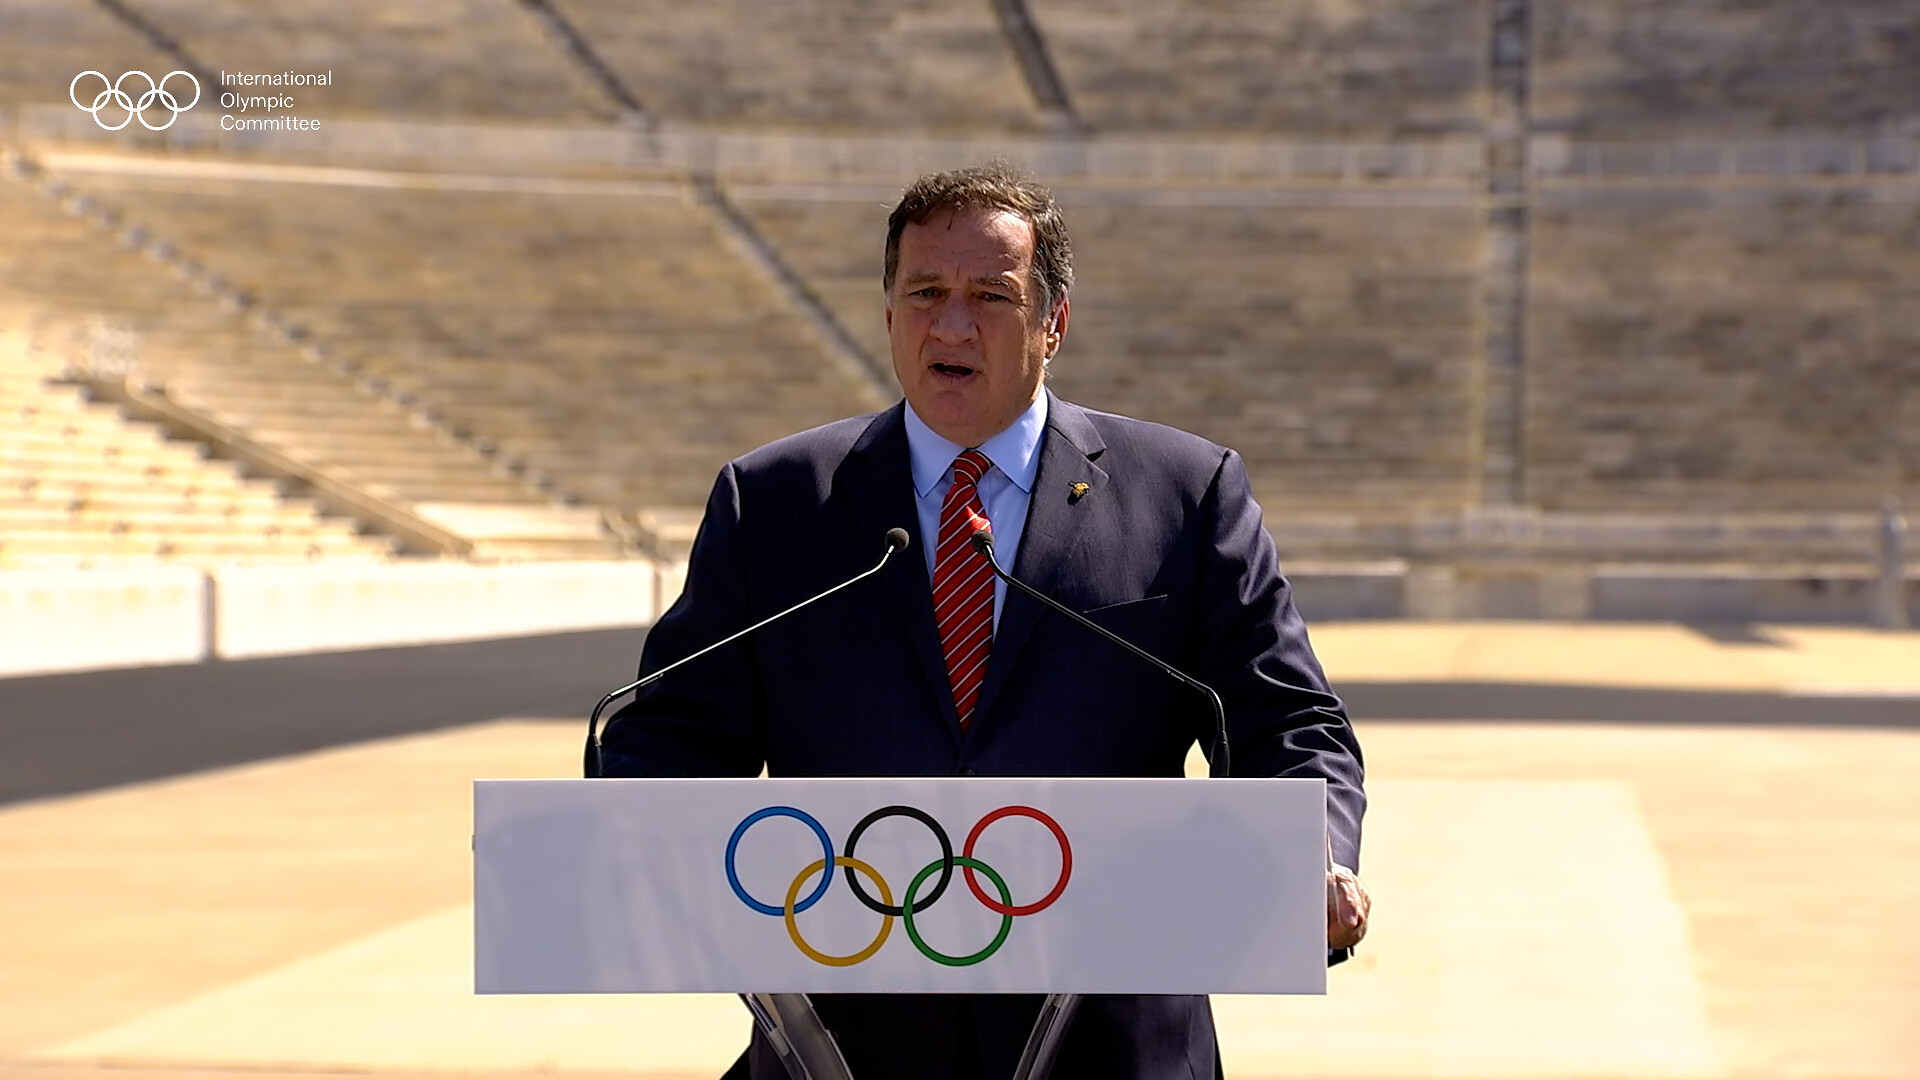 Hellenic Olympic Committee President and IOC member Spyros Capralos said he was hopeful Athens would be approved as hosts of the 2025 Session ©IOC